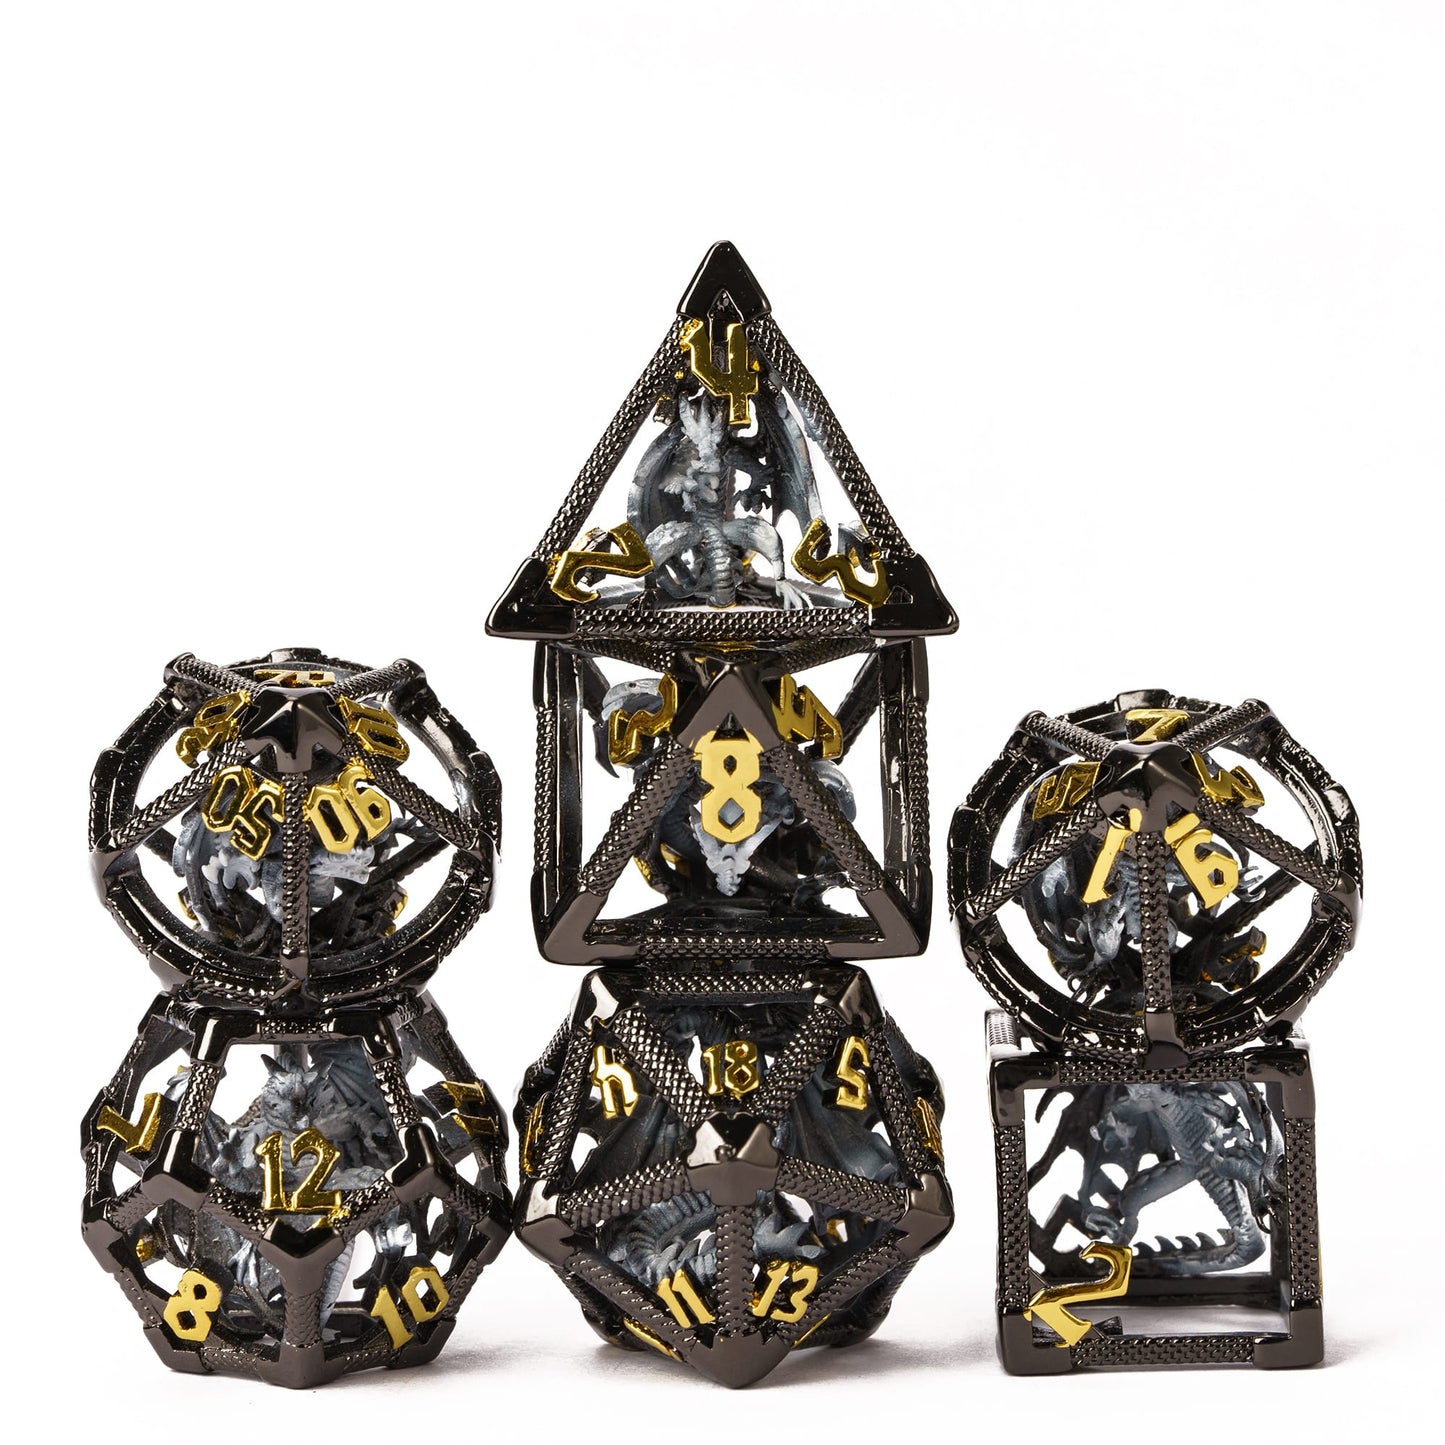 Drake's Nest - Hollow Metal Dice Collection